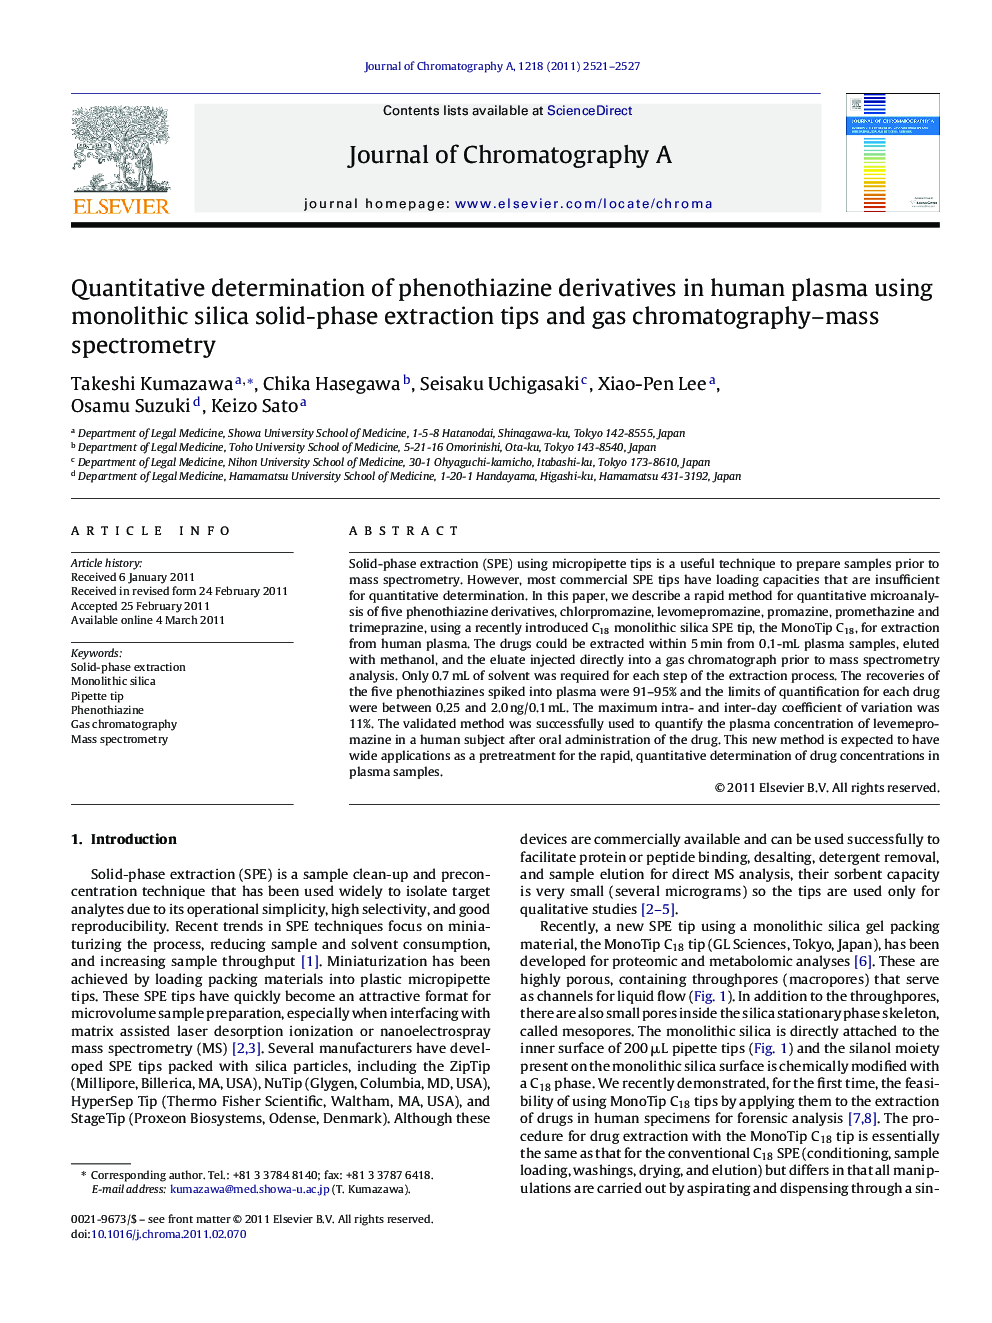 Quantitative determination of phenothiazine derivatives in human plasma using monolithic silica solid-phase extraction tips and gas chromatography–mass spectrometry